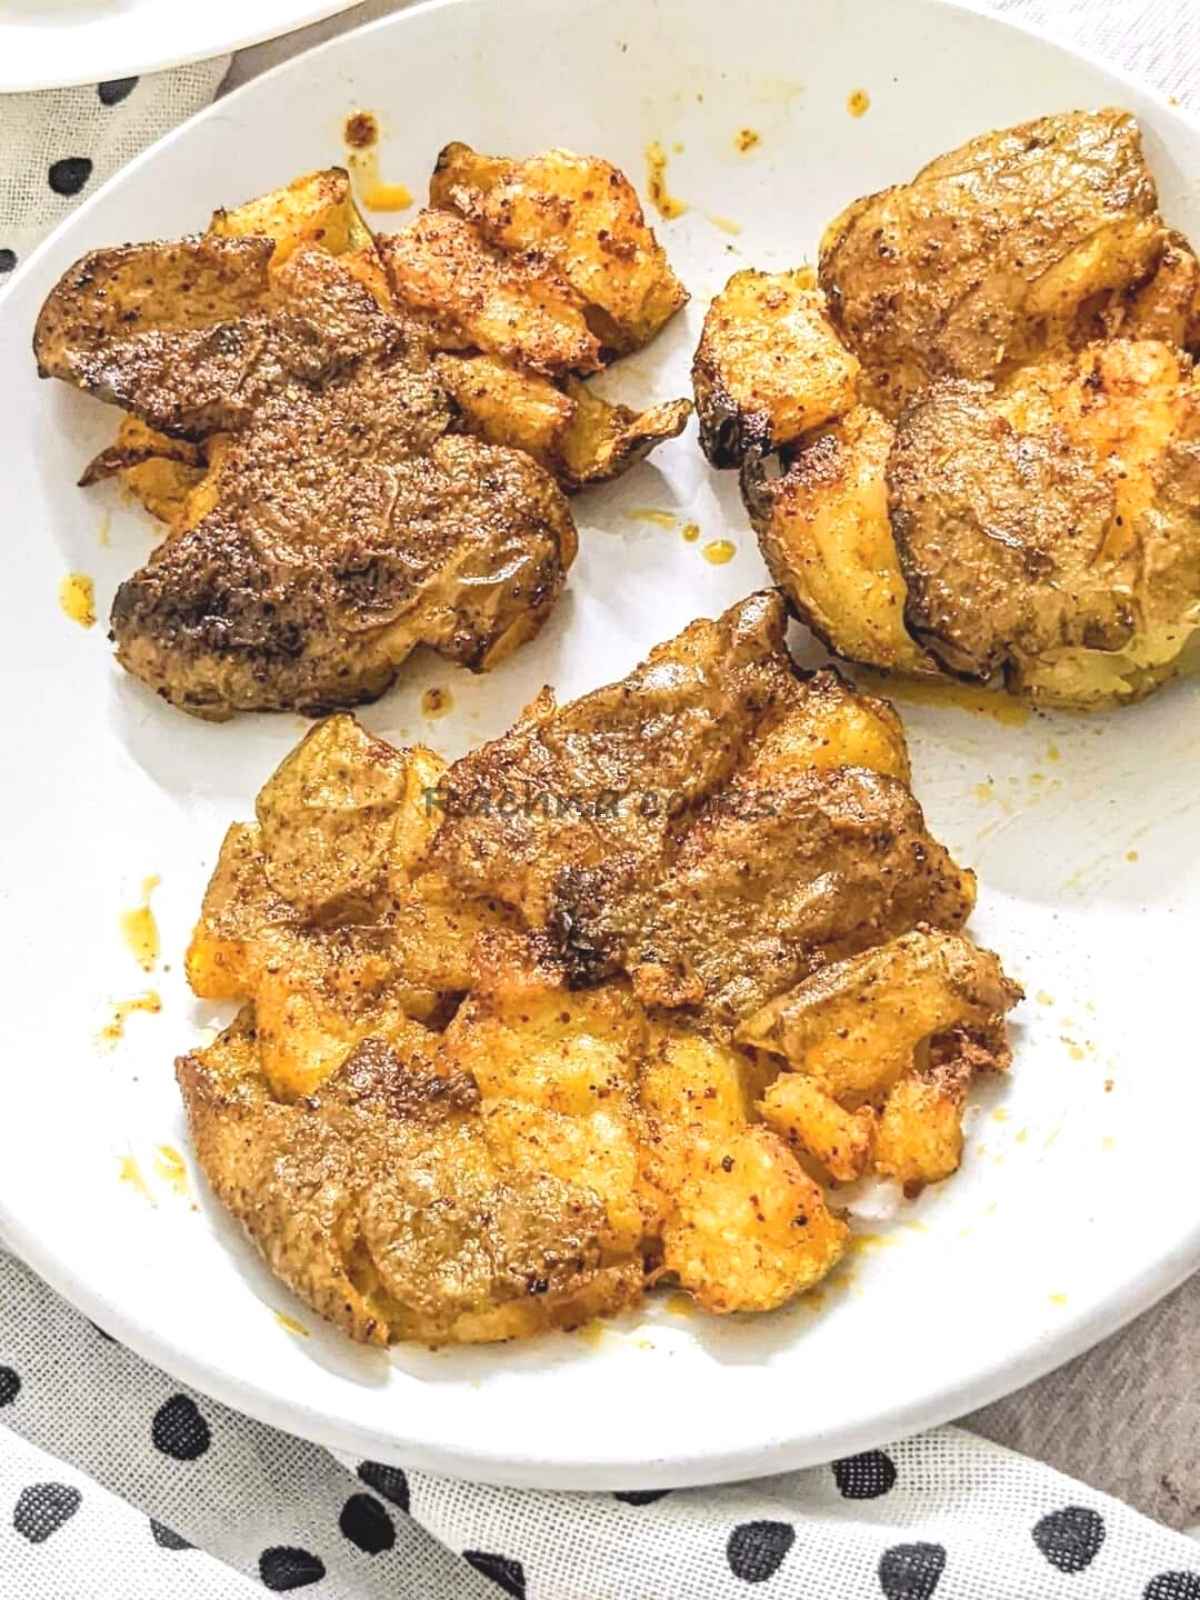 3 smashed air fryer potatoes served on a plate.